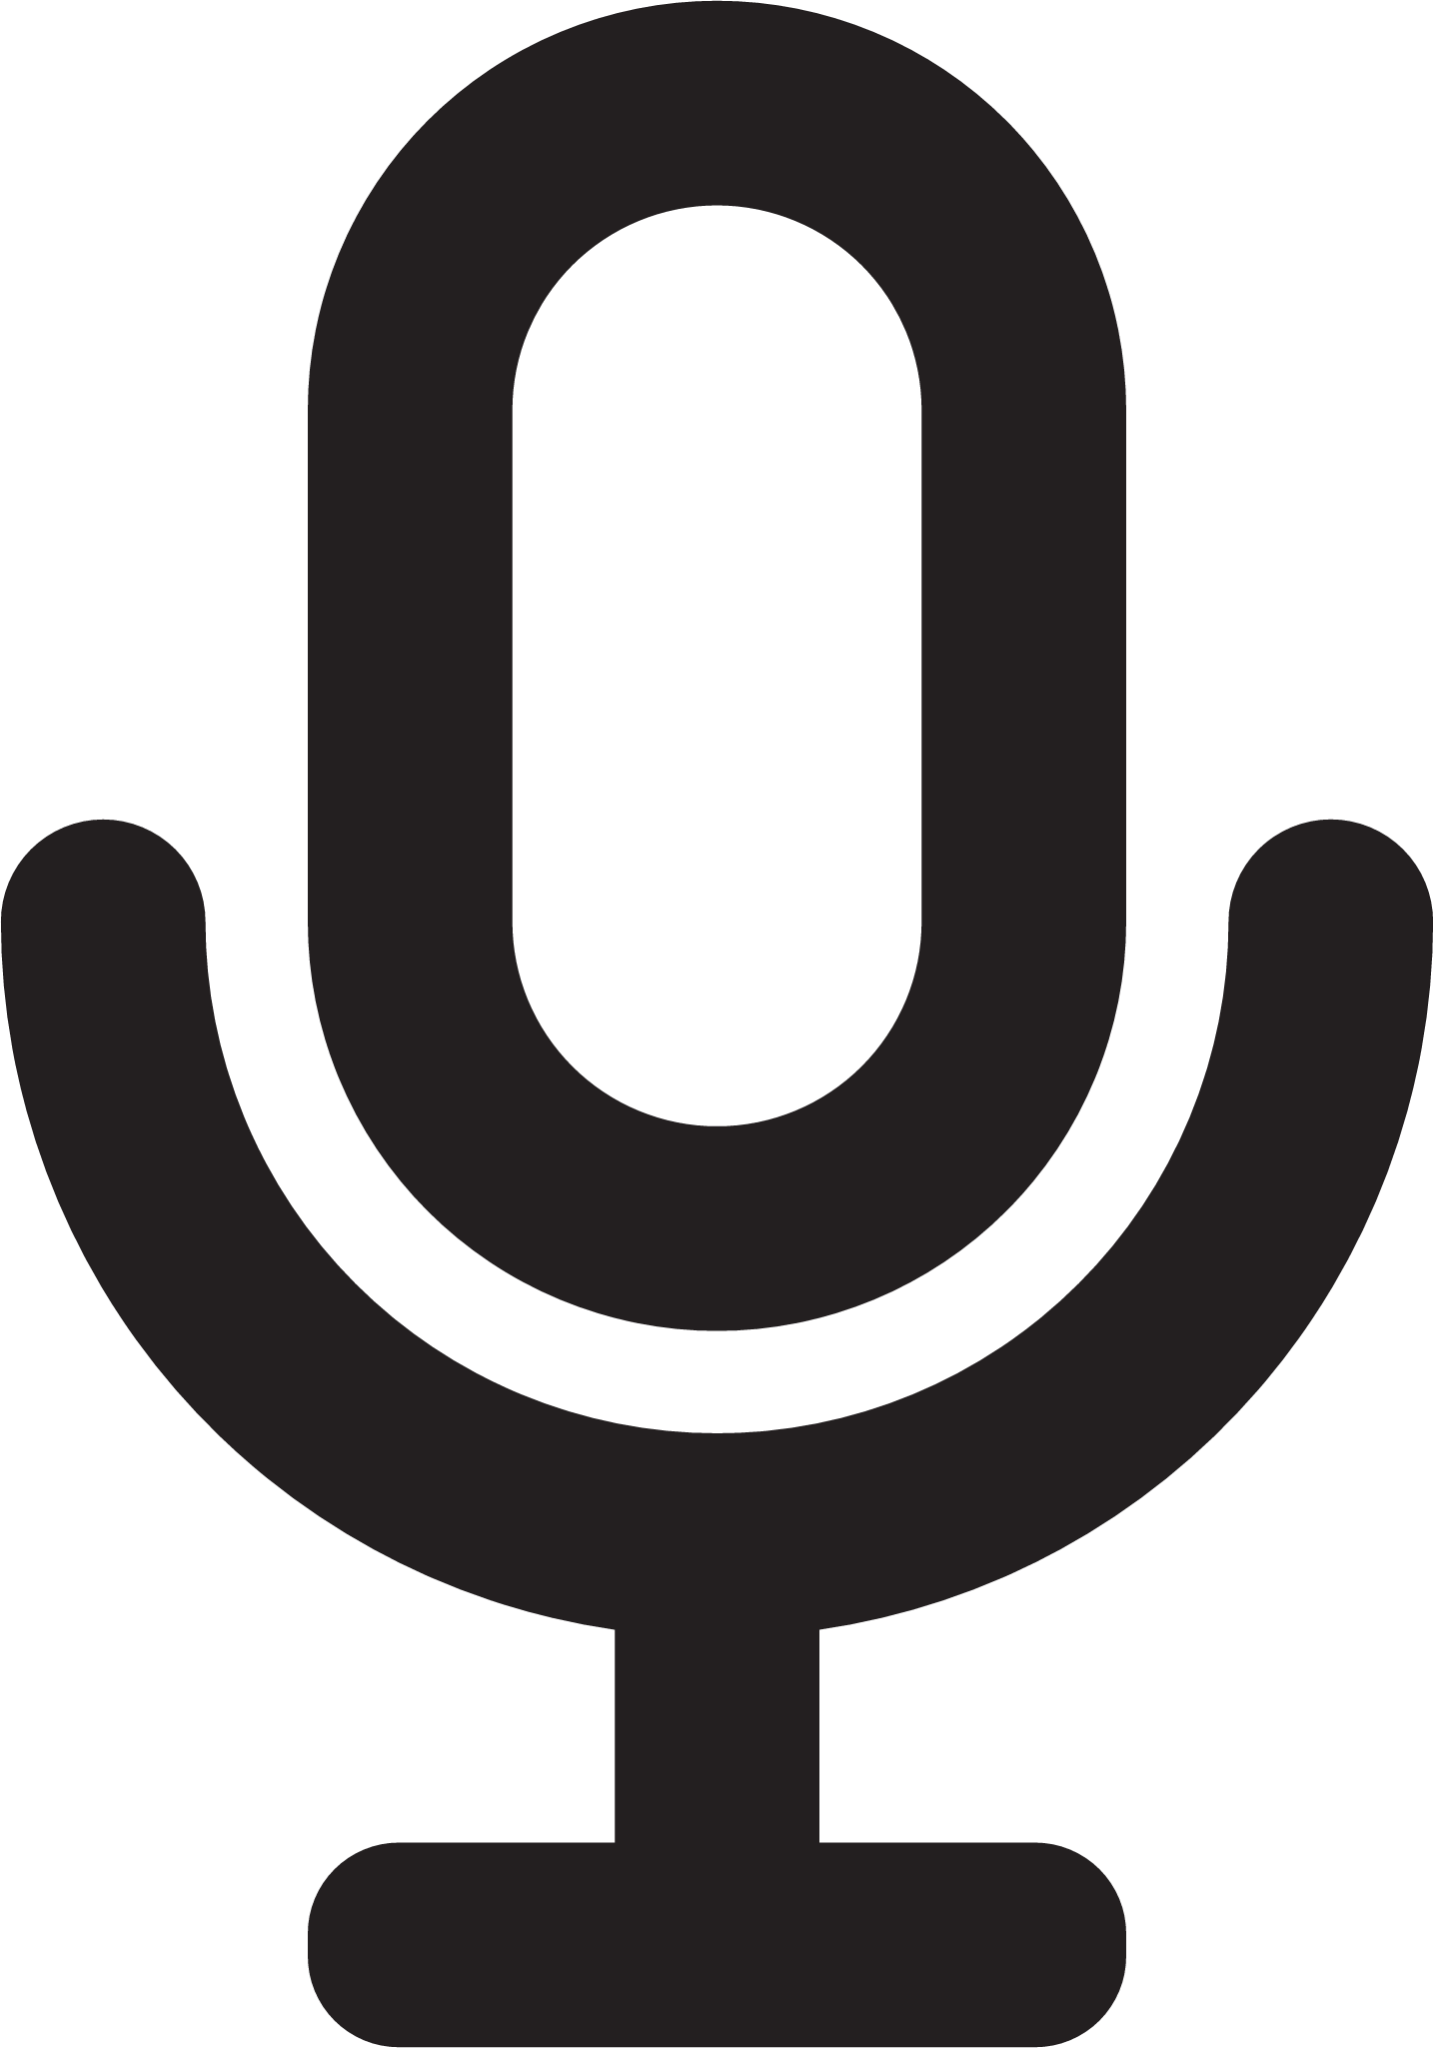 mic outline icon